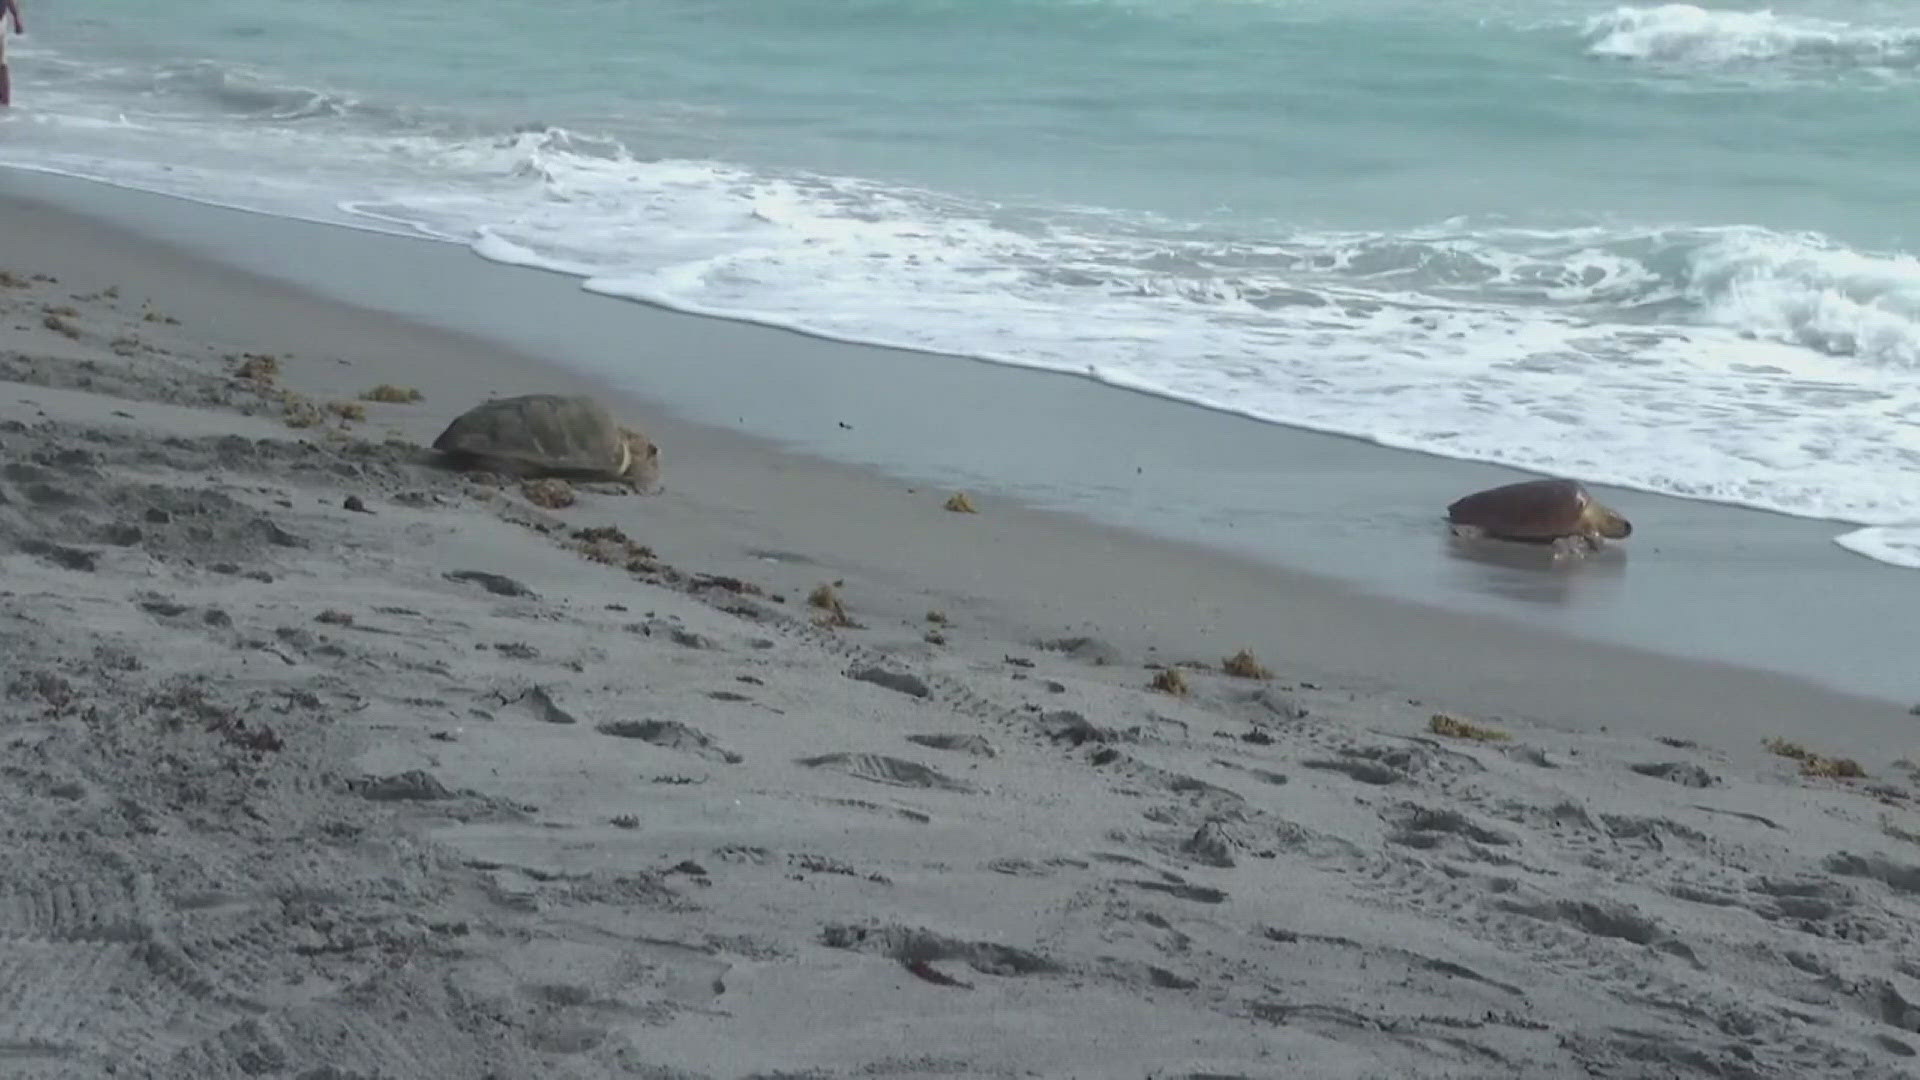 Two loggerhead turtles were released back into the Florida ocean after needing surgery to repair a flipper that had been caught in a fishing line.